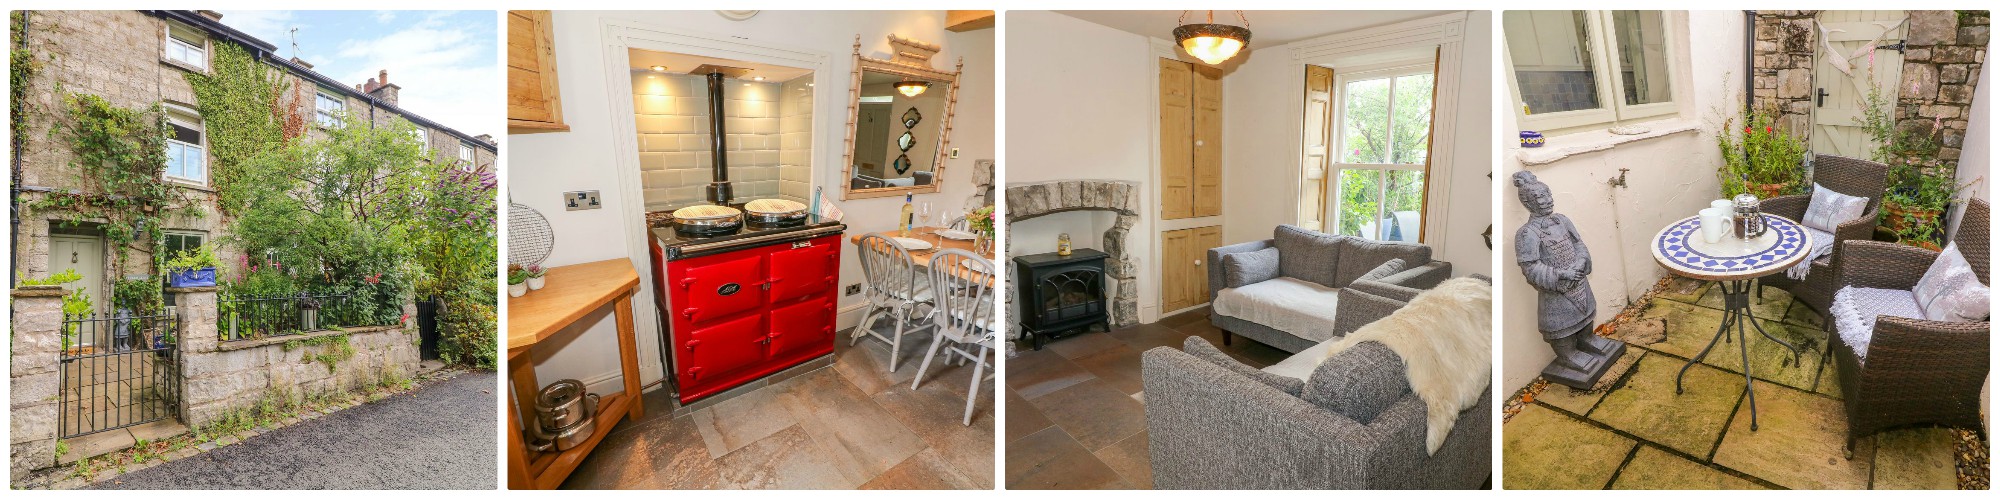 sleeps  four - Kendal holiday cottage right in the heart of the historic market town